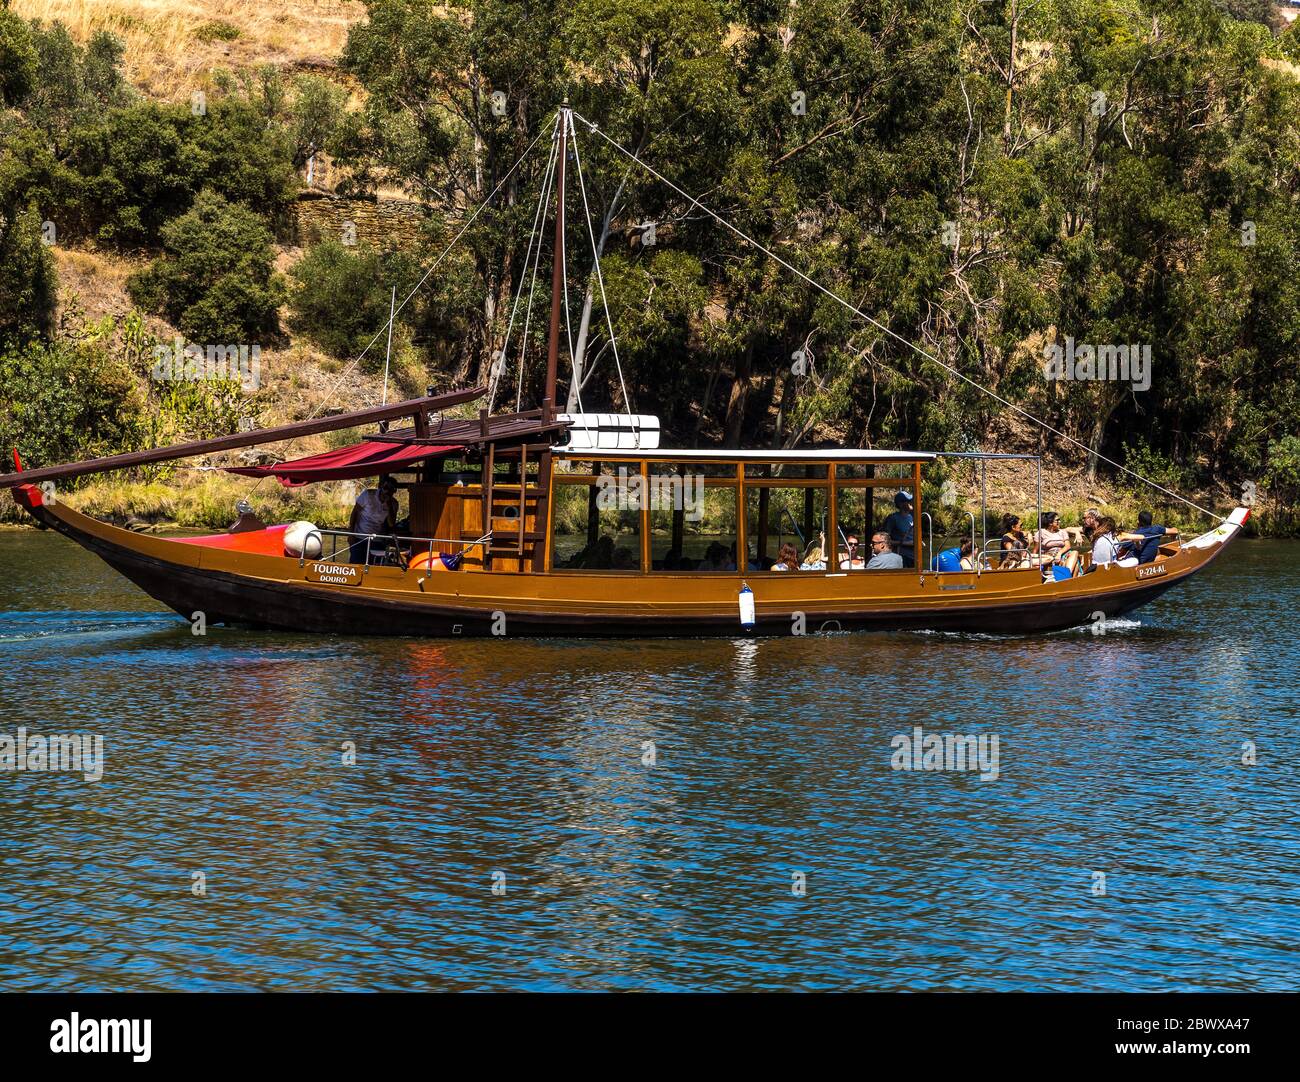 Tourists on a typical rabelo river trip boat on the Douro river Northern Portugal Stock Photo